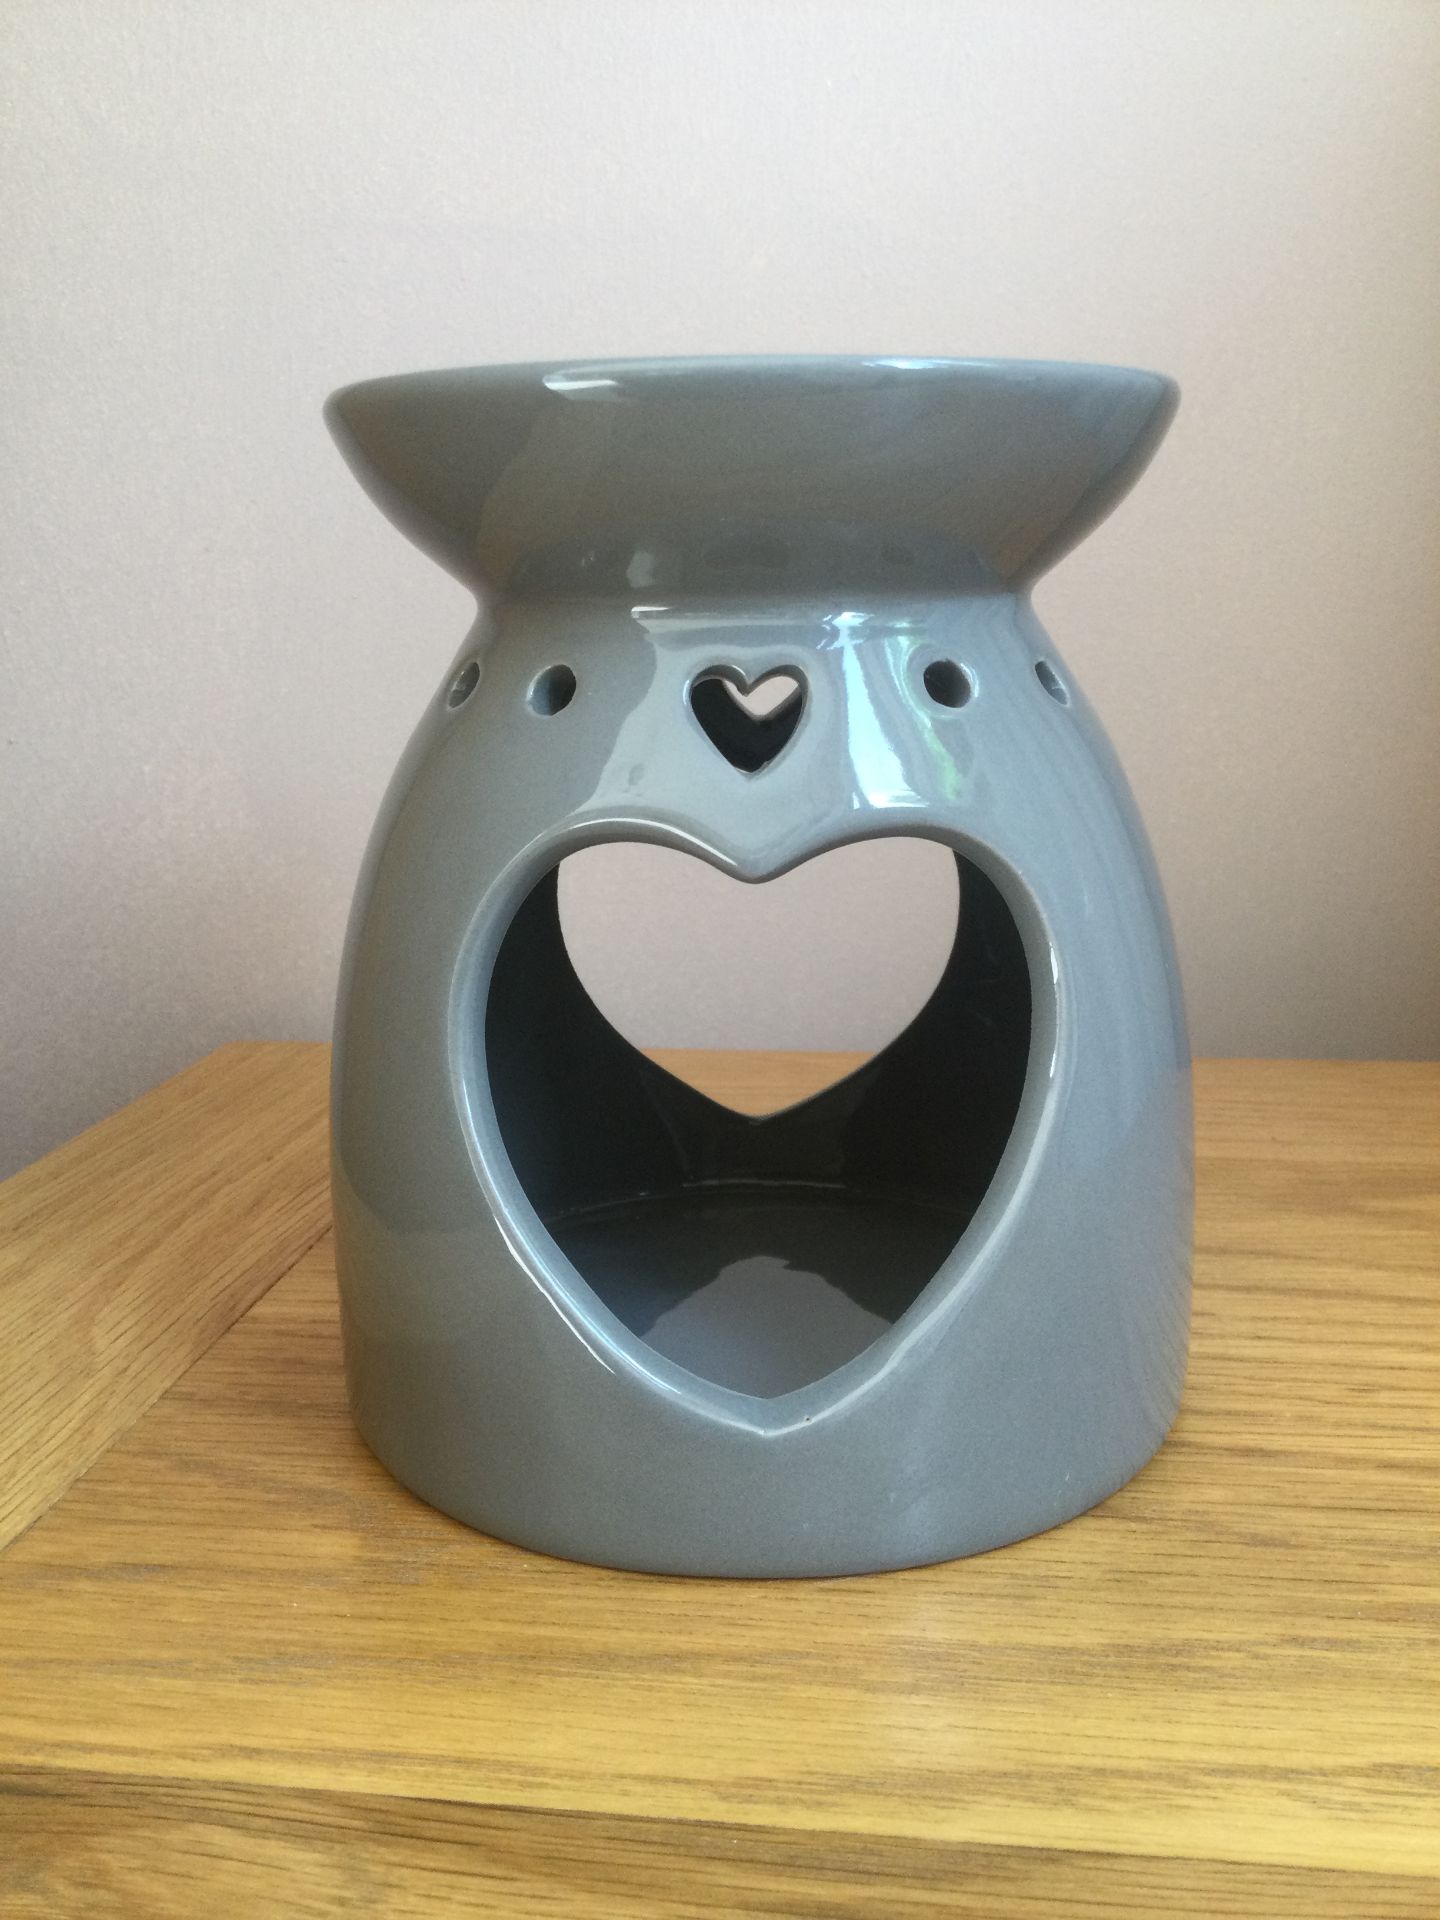 Piquaboo Large “Grey Heart” Ceramic Oil Burner Height 13cm, New With Gift Box - Image 3 of 3